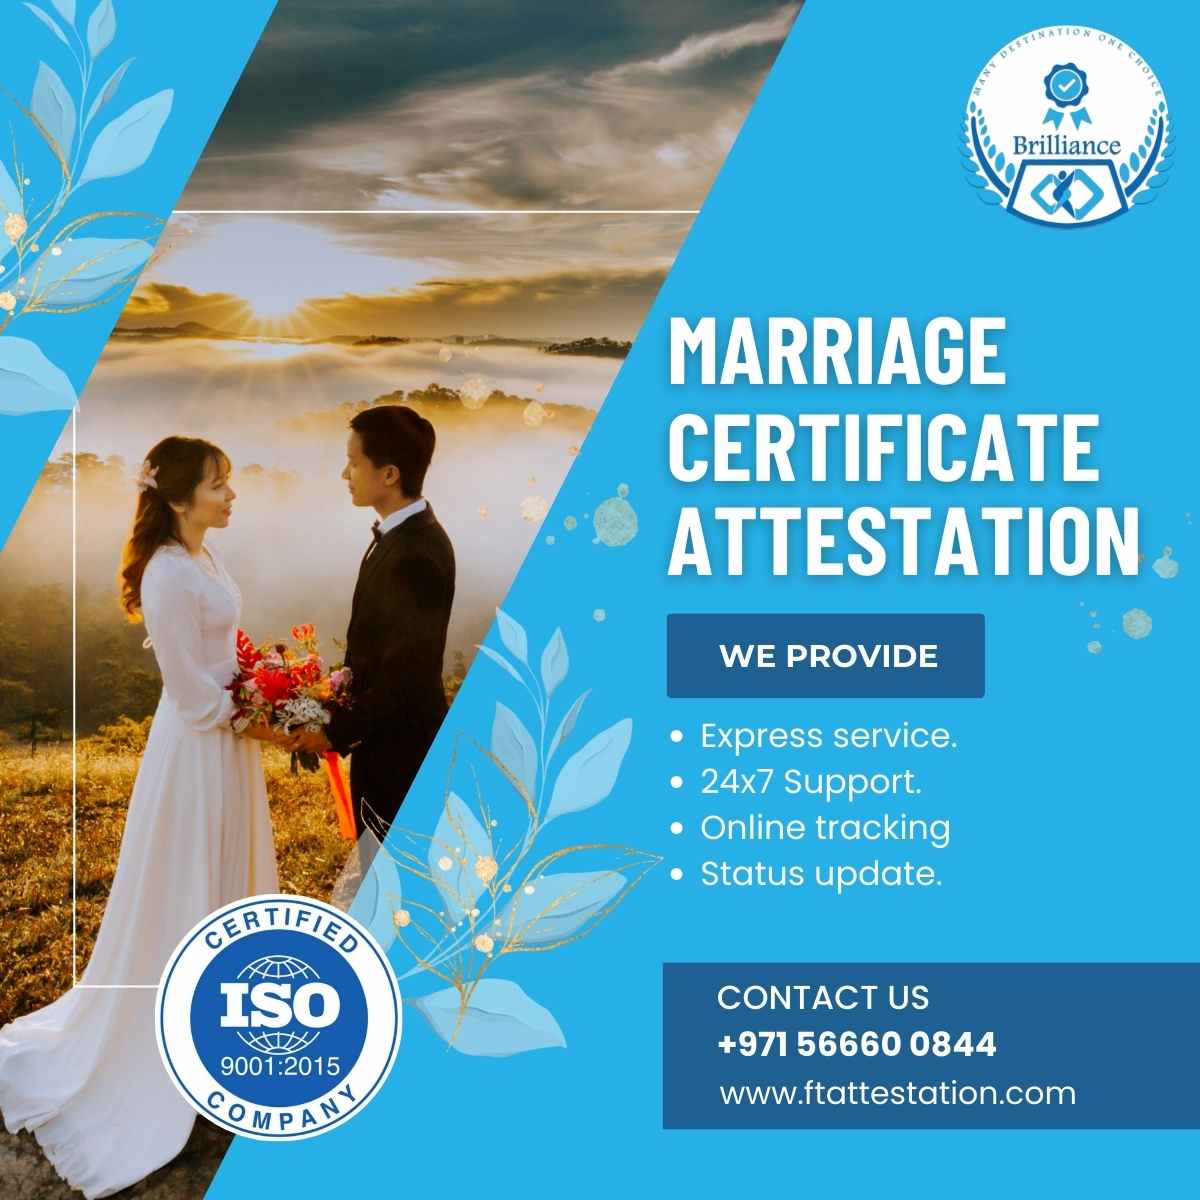 Leading Marriage Certificate Attestation Service Provider In Uae